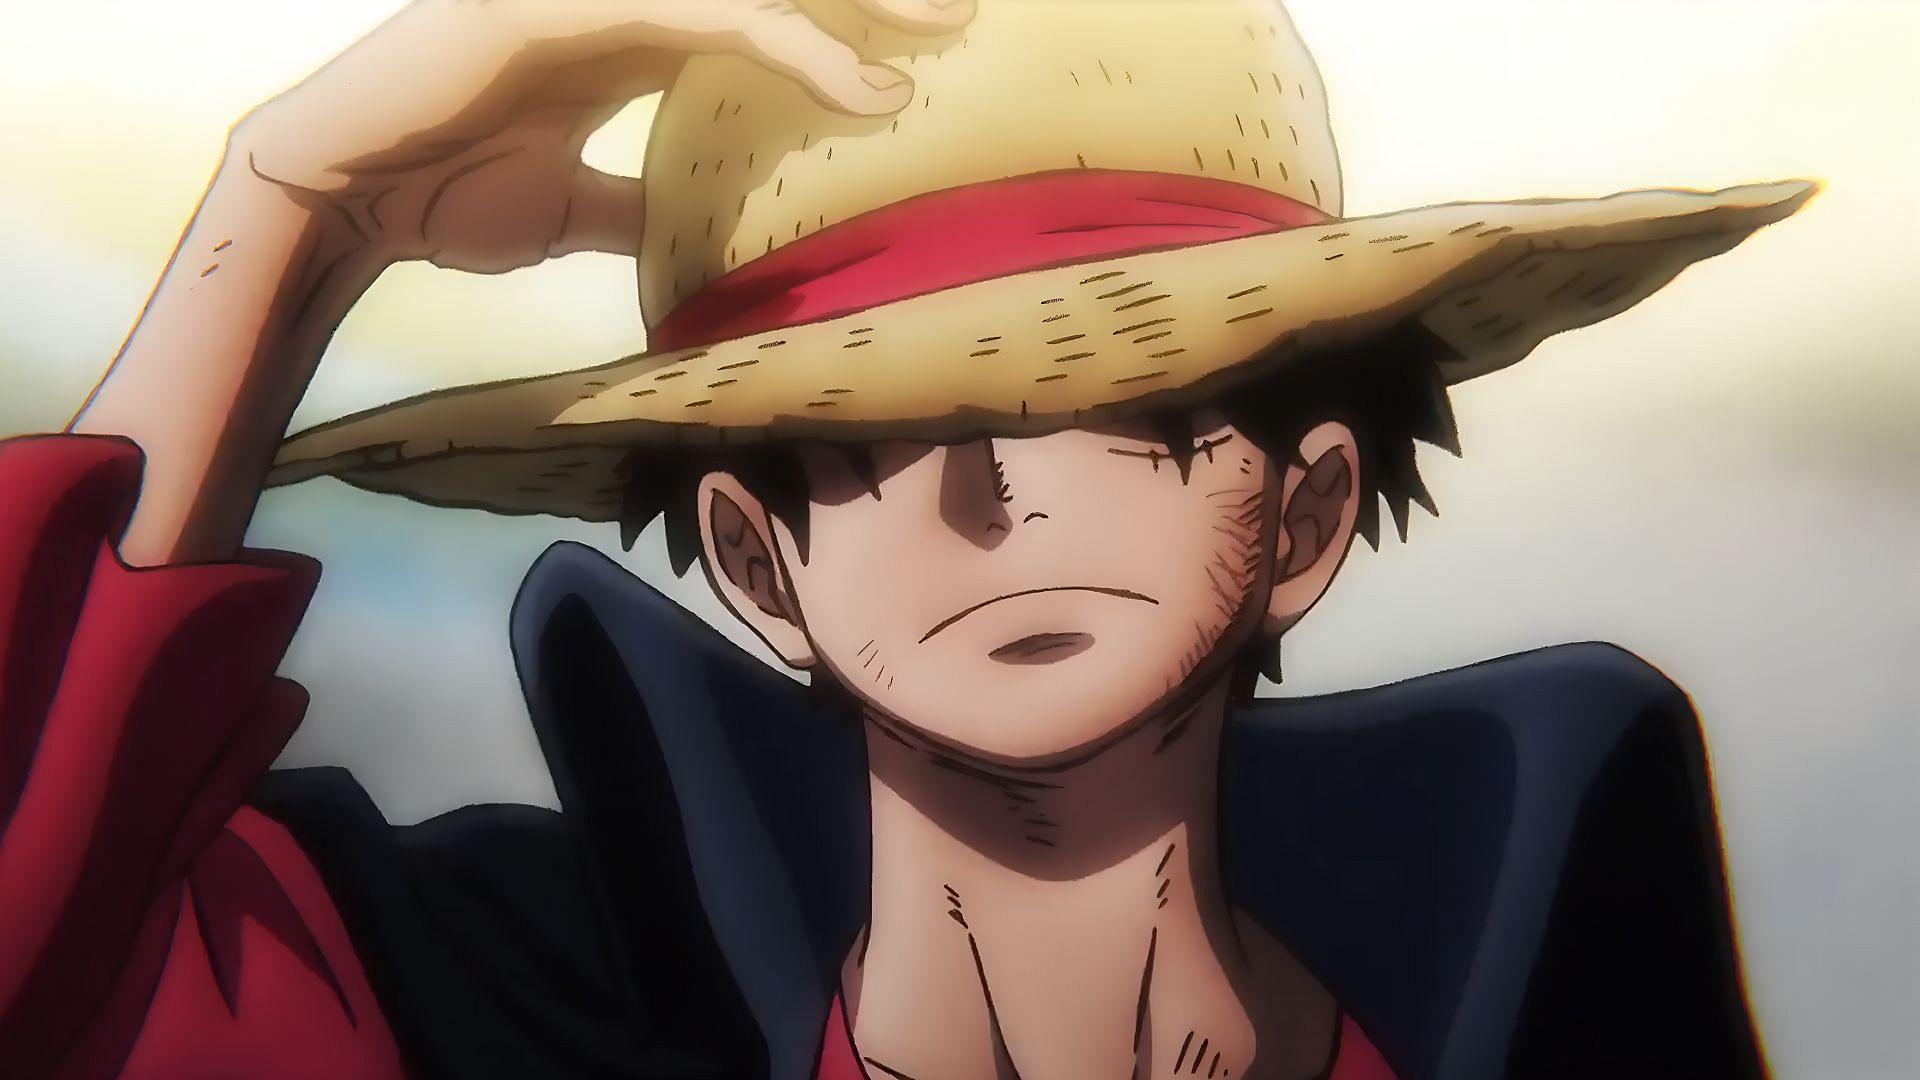 Monkey D. Luffy is the iconic main character of One Piece (Image via Toei Animation, One Piece)